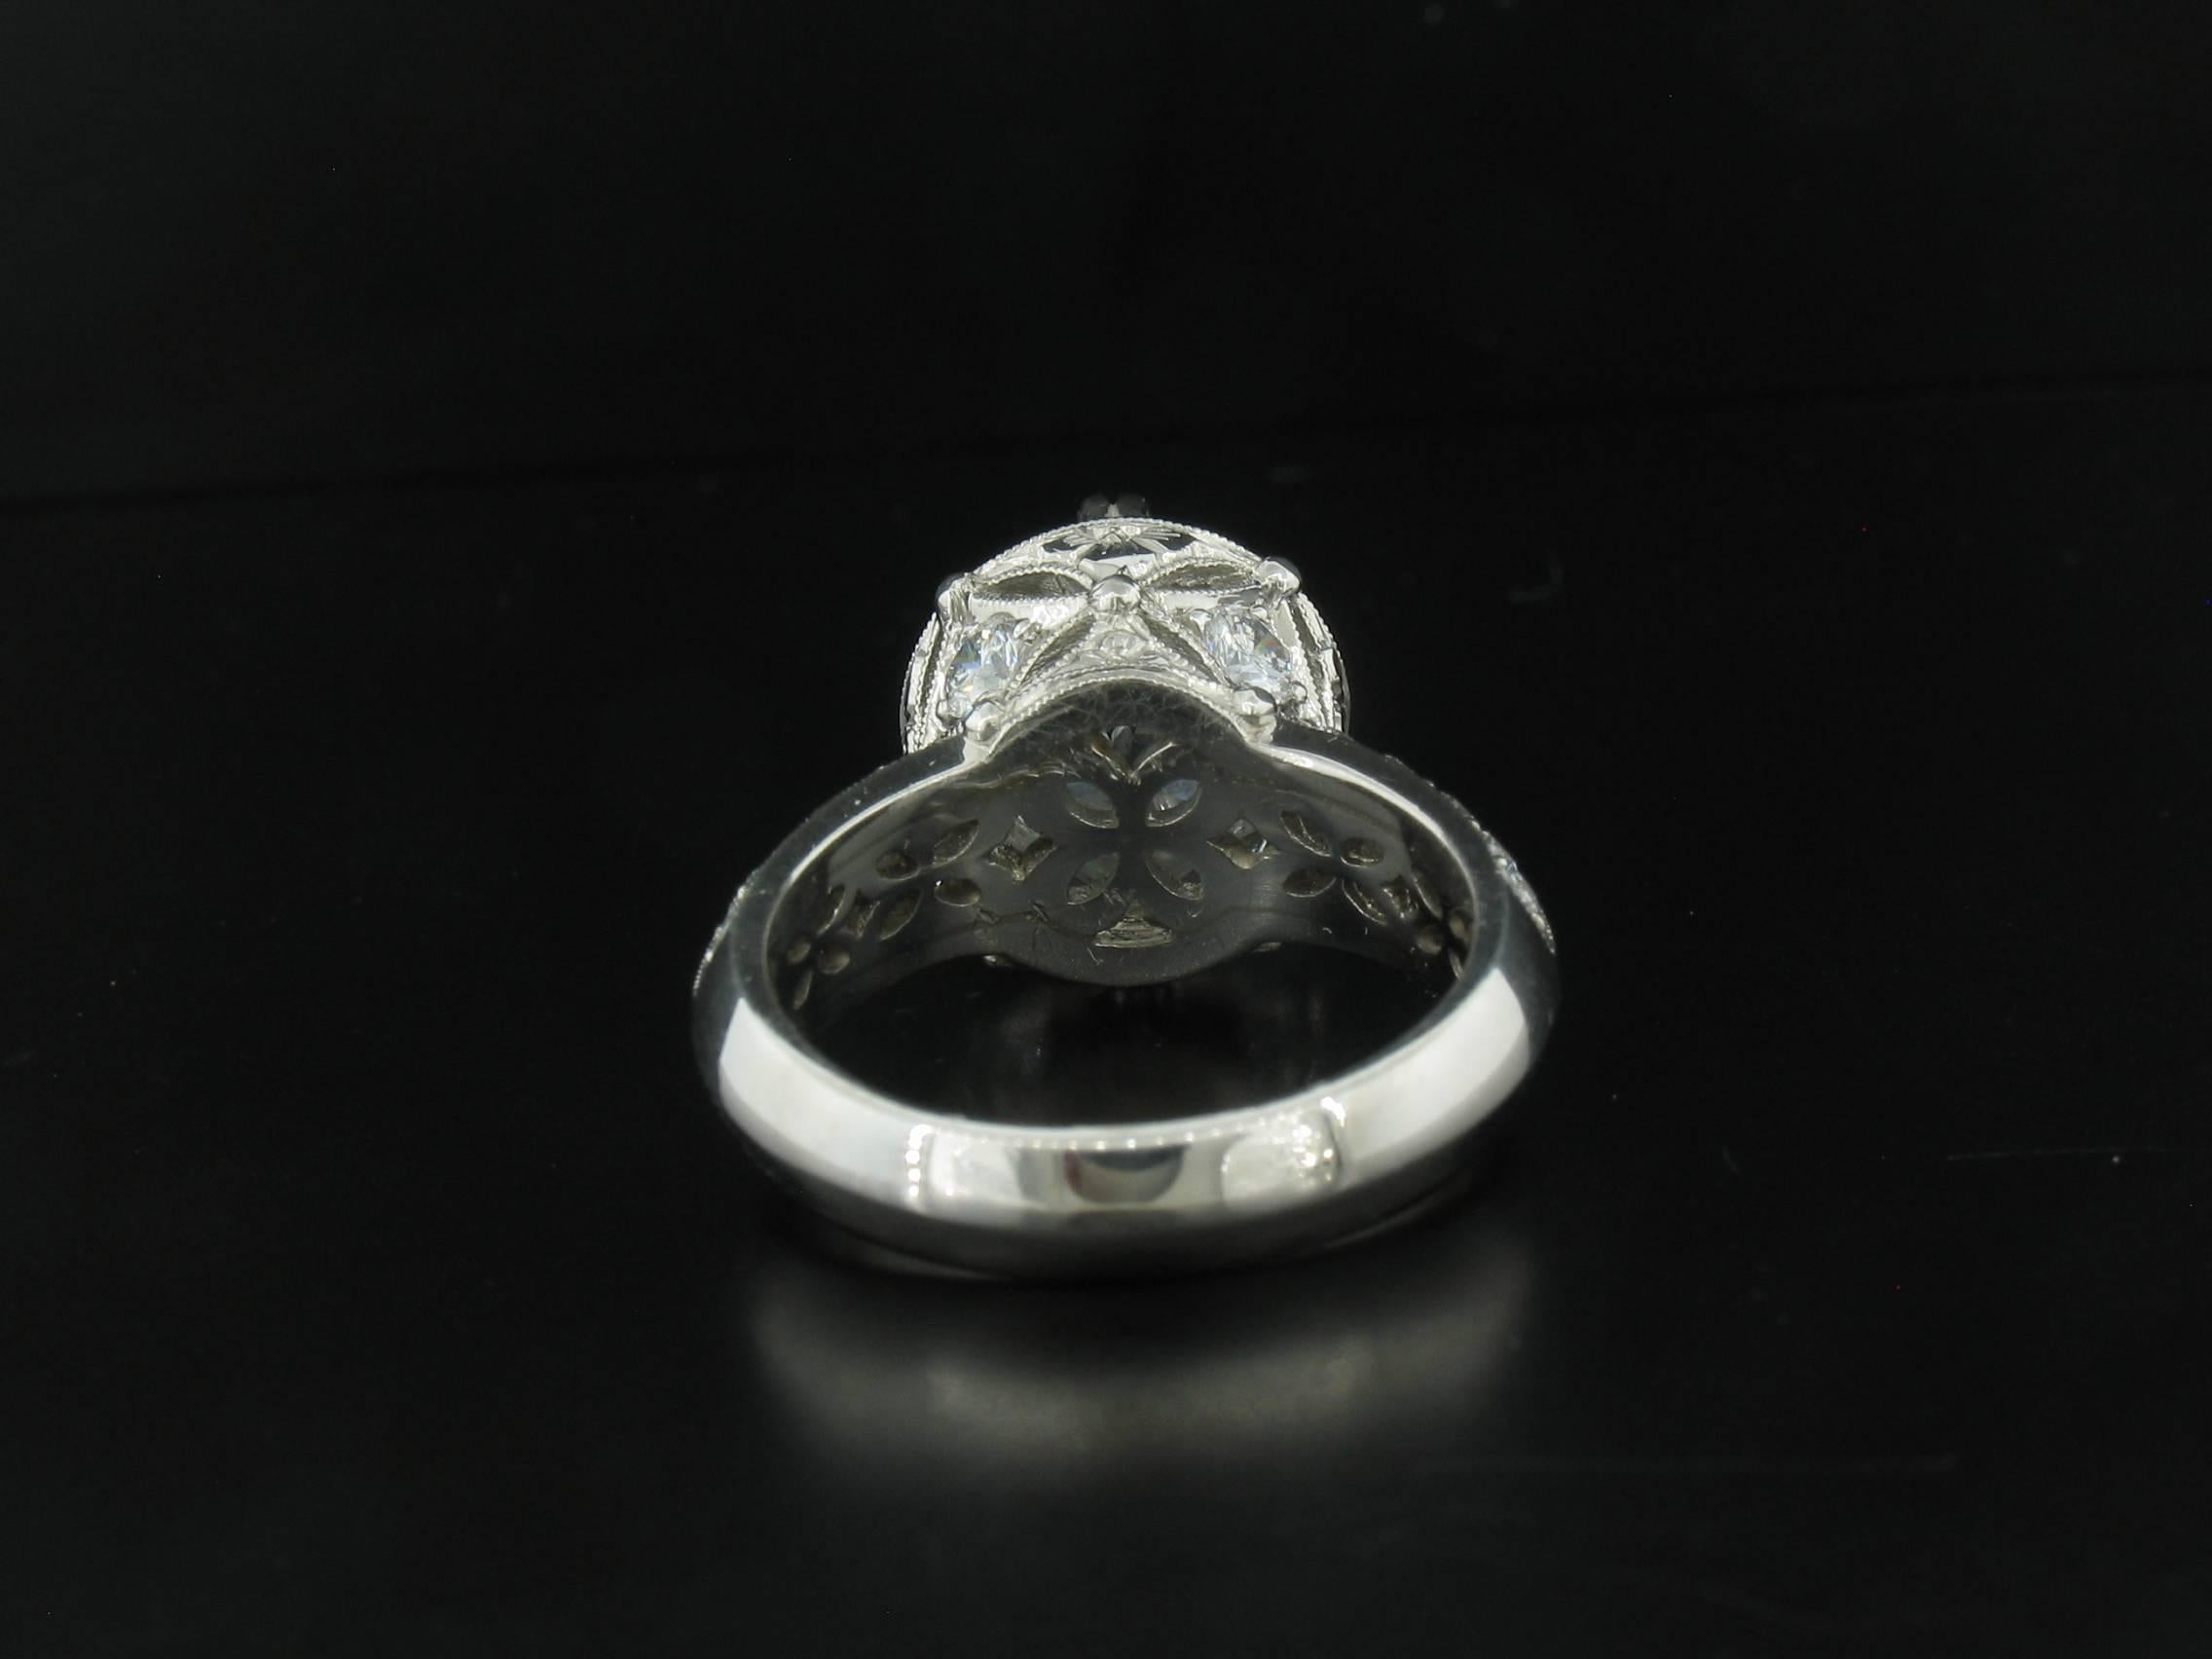 Gorgeous Platinum Semi Mount Ring by Varna.  Diamonds in the setting weigh a total of 1.05 carats.  The center stone is a synthethic Cubic Zirconia meant as a placeholder so you can choose your own stone in the 9-9 1/2mm diameter range.  Size 6 1/2